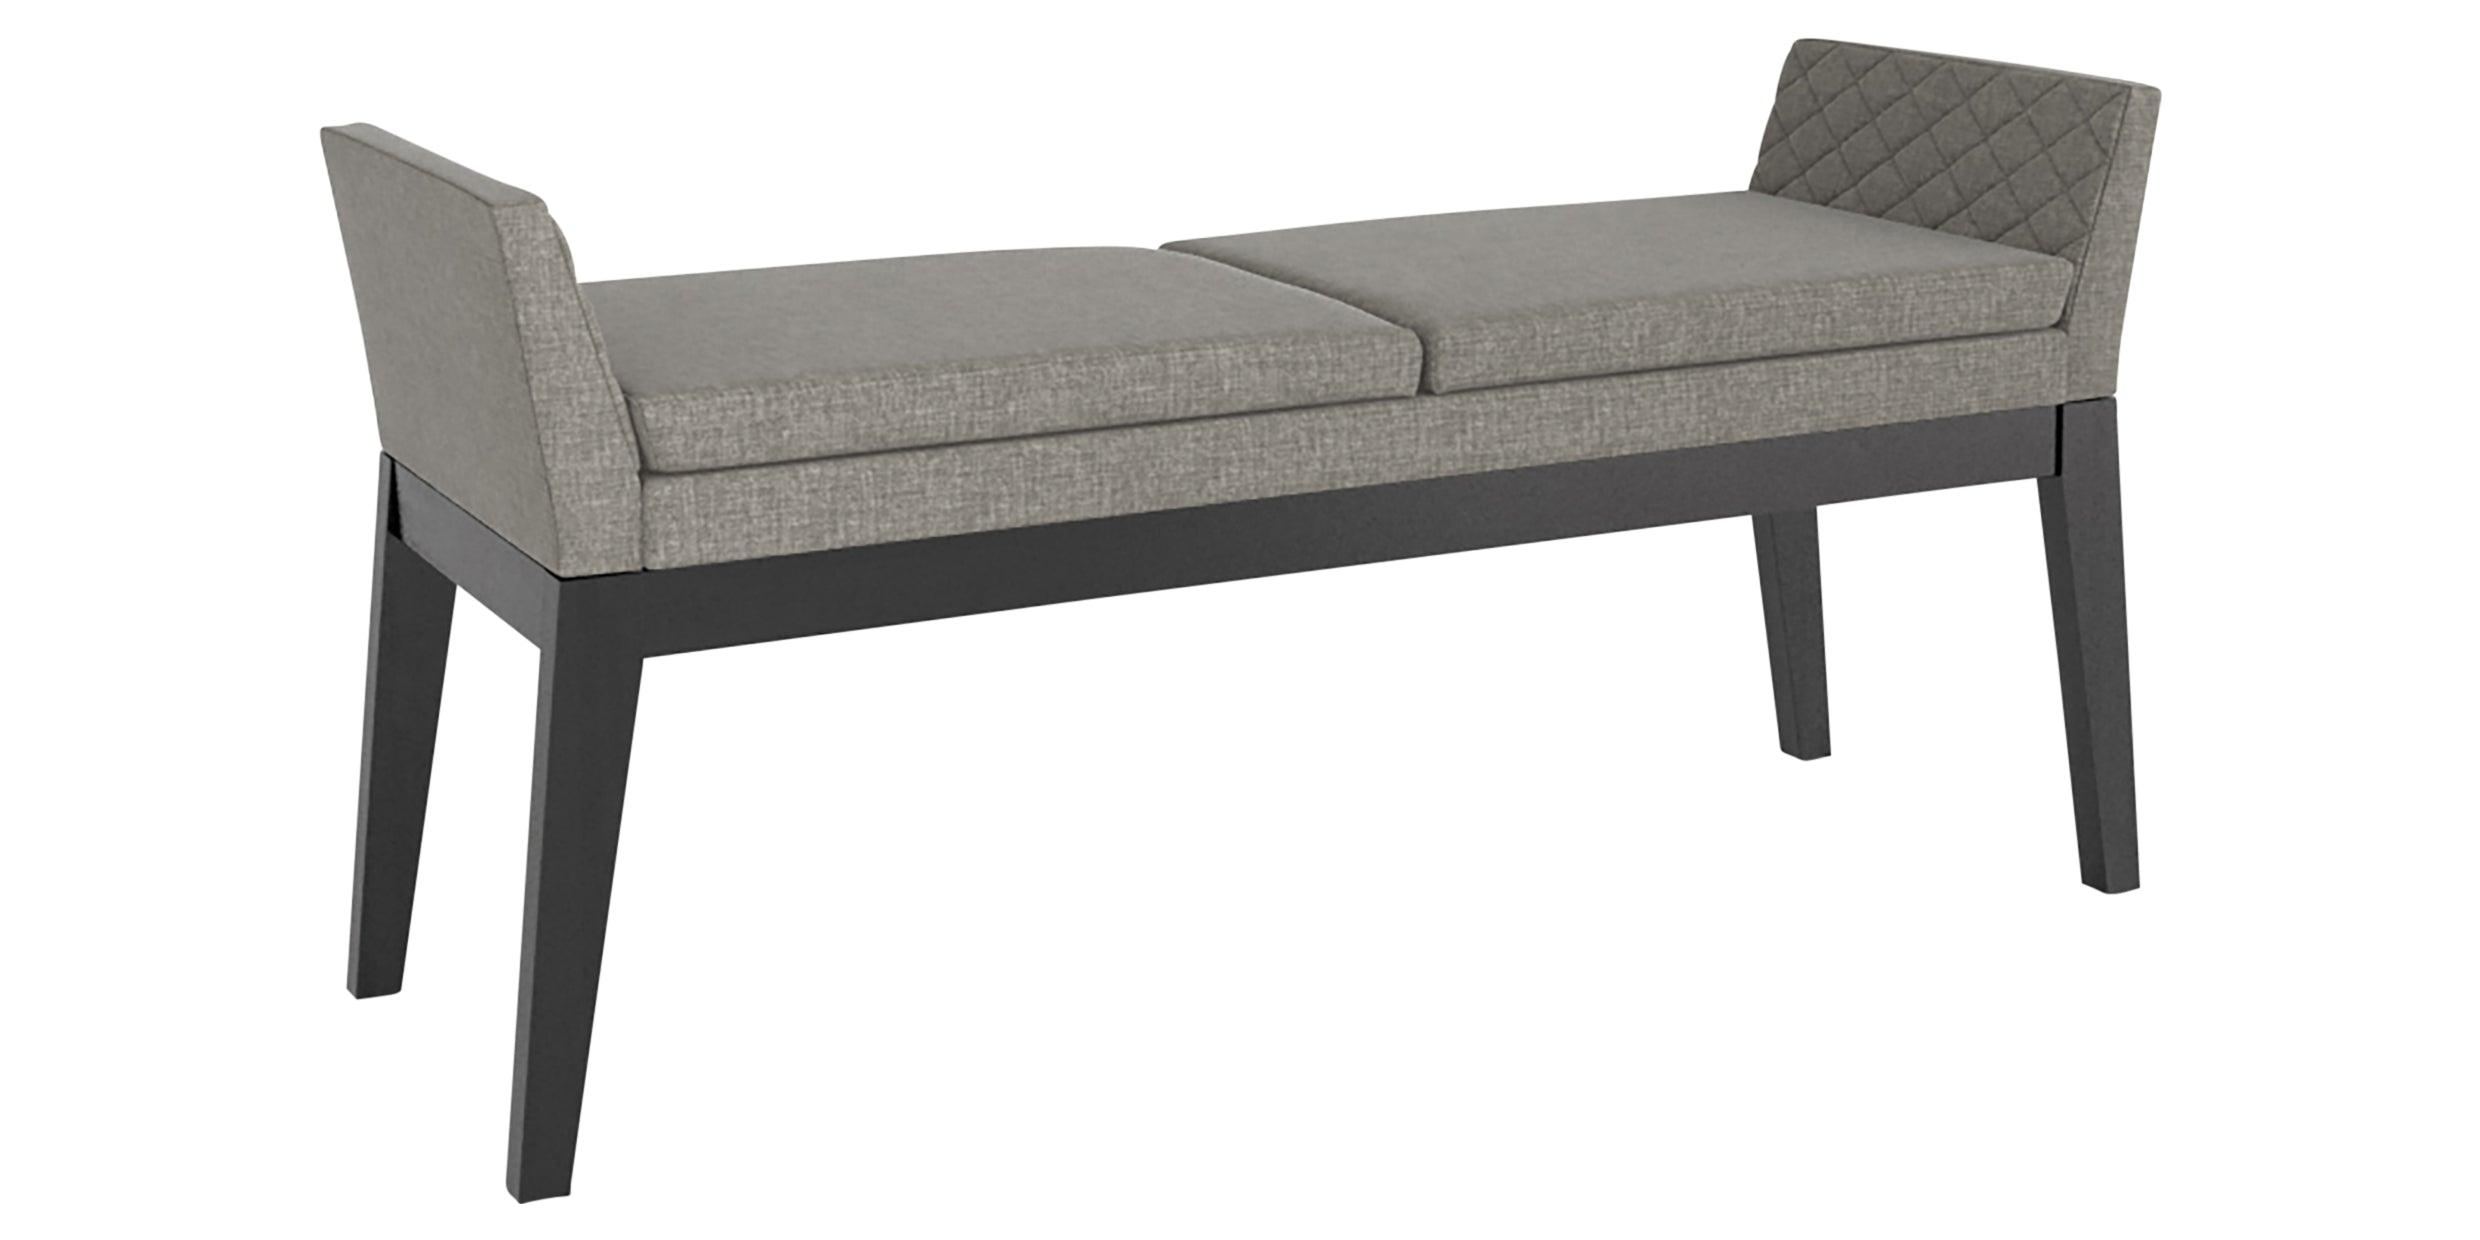 Peppercorn Washed &amp; Fabric TN | Canadel Downtown Bench 5170 | Valley Ridge Furniture